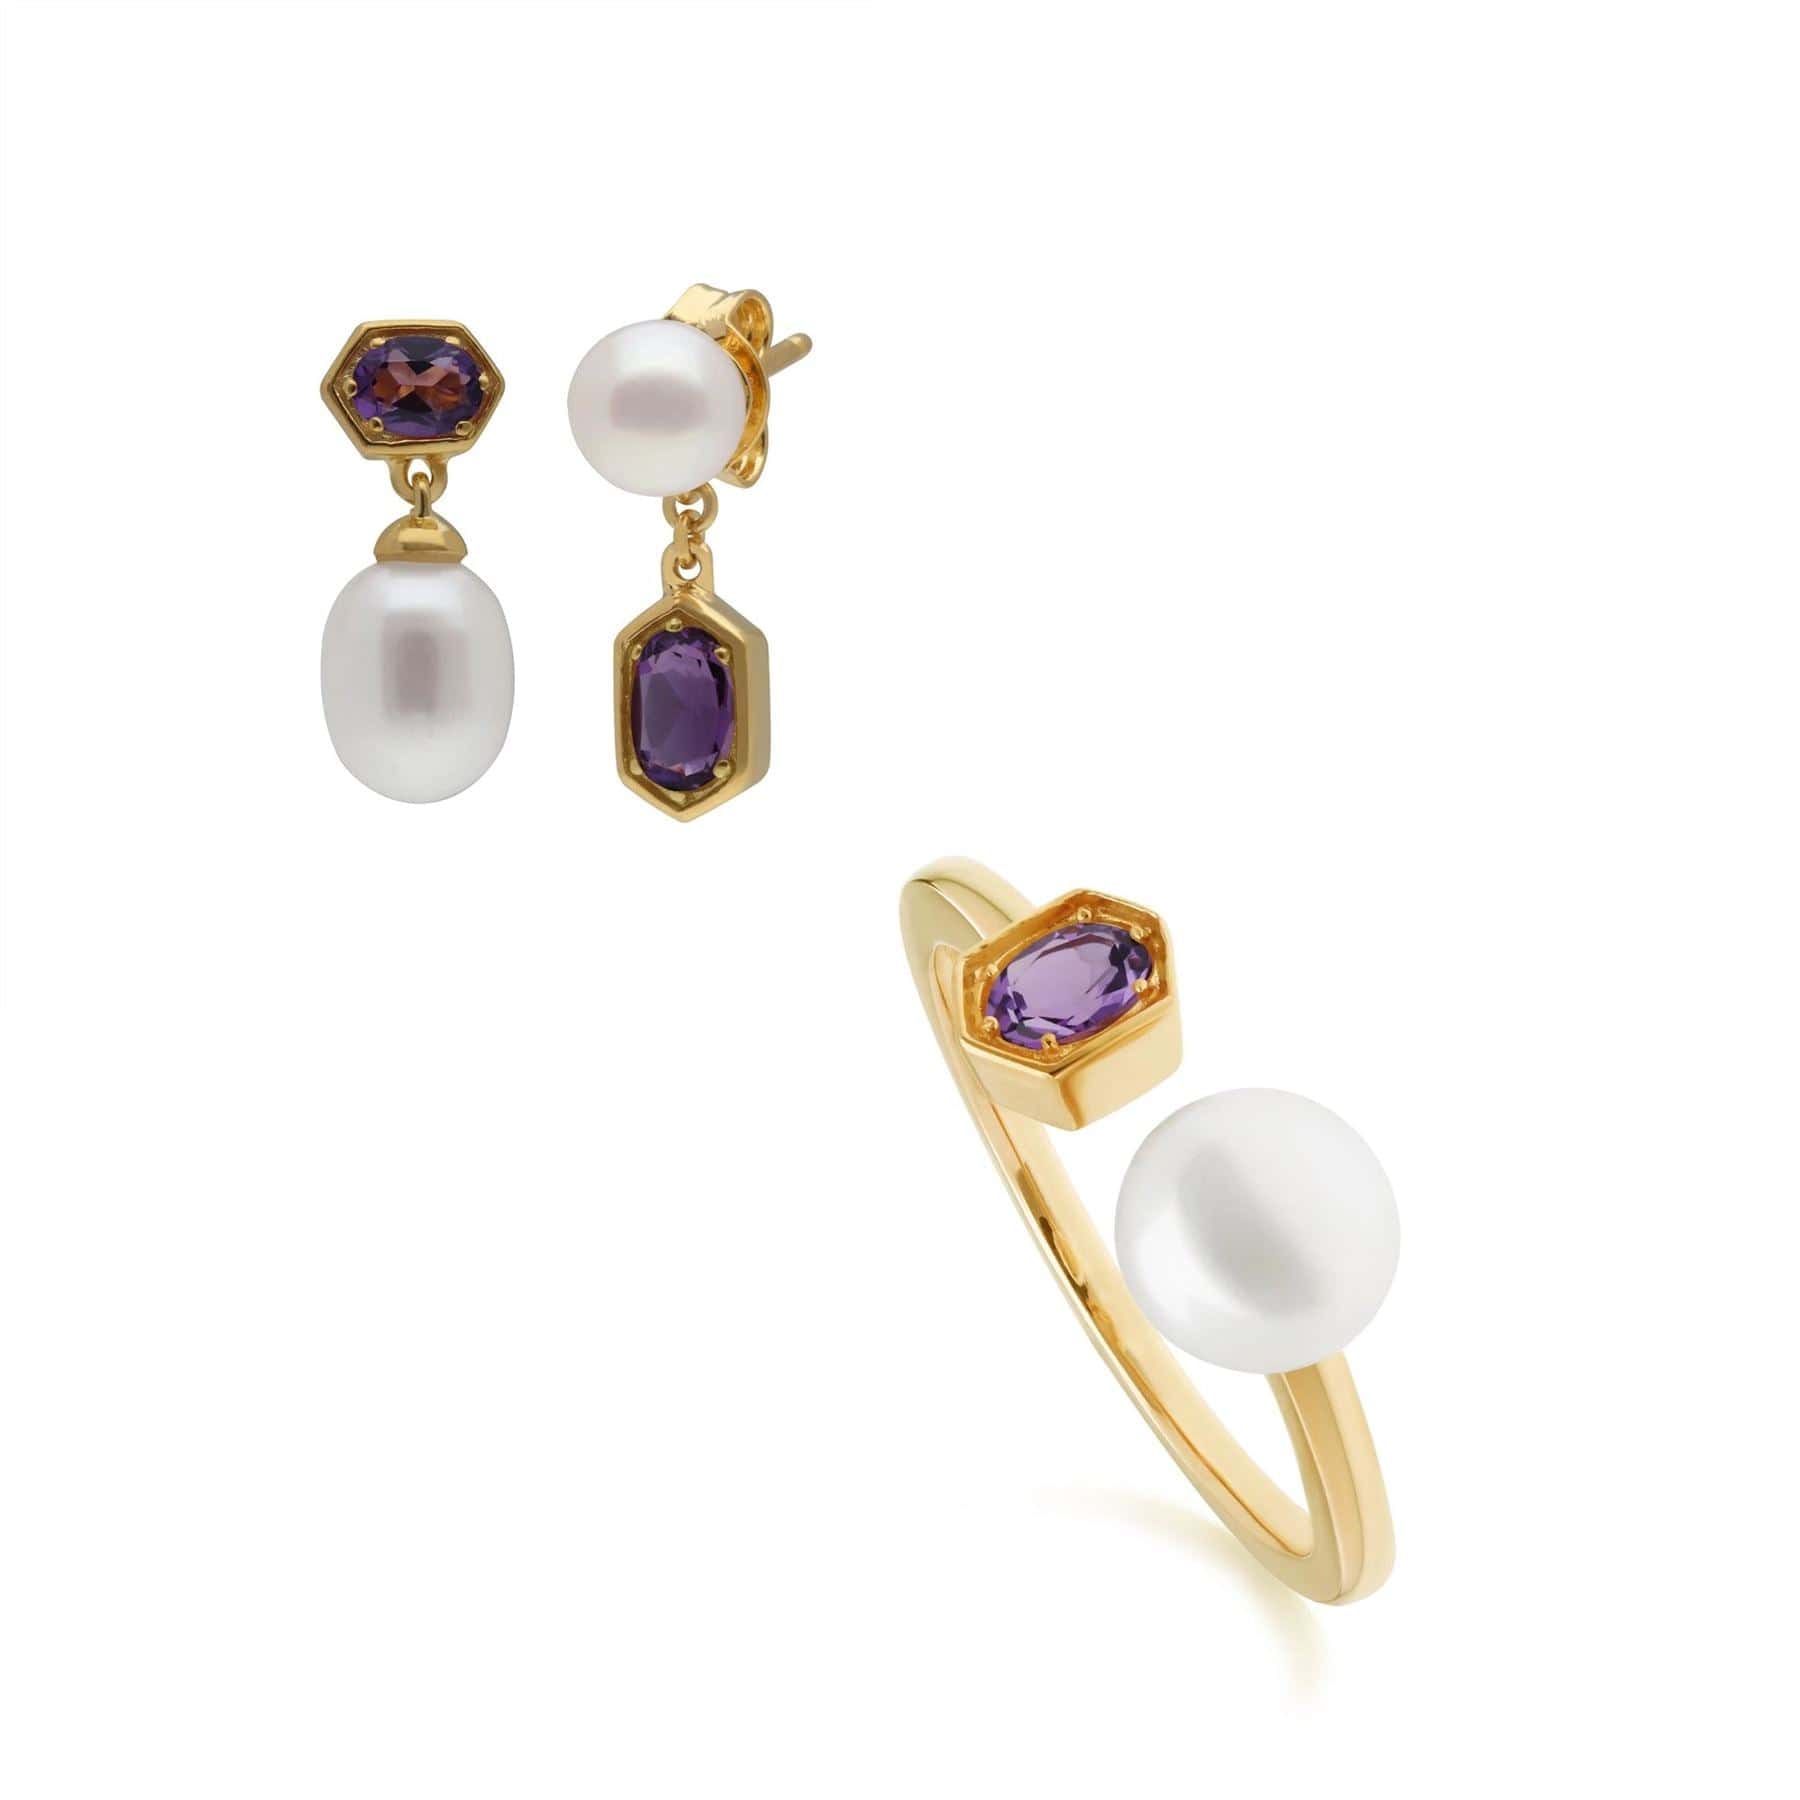 Image of Modern Pearl & Amethyst Earring & Ring Set in Gold Plated Silver